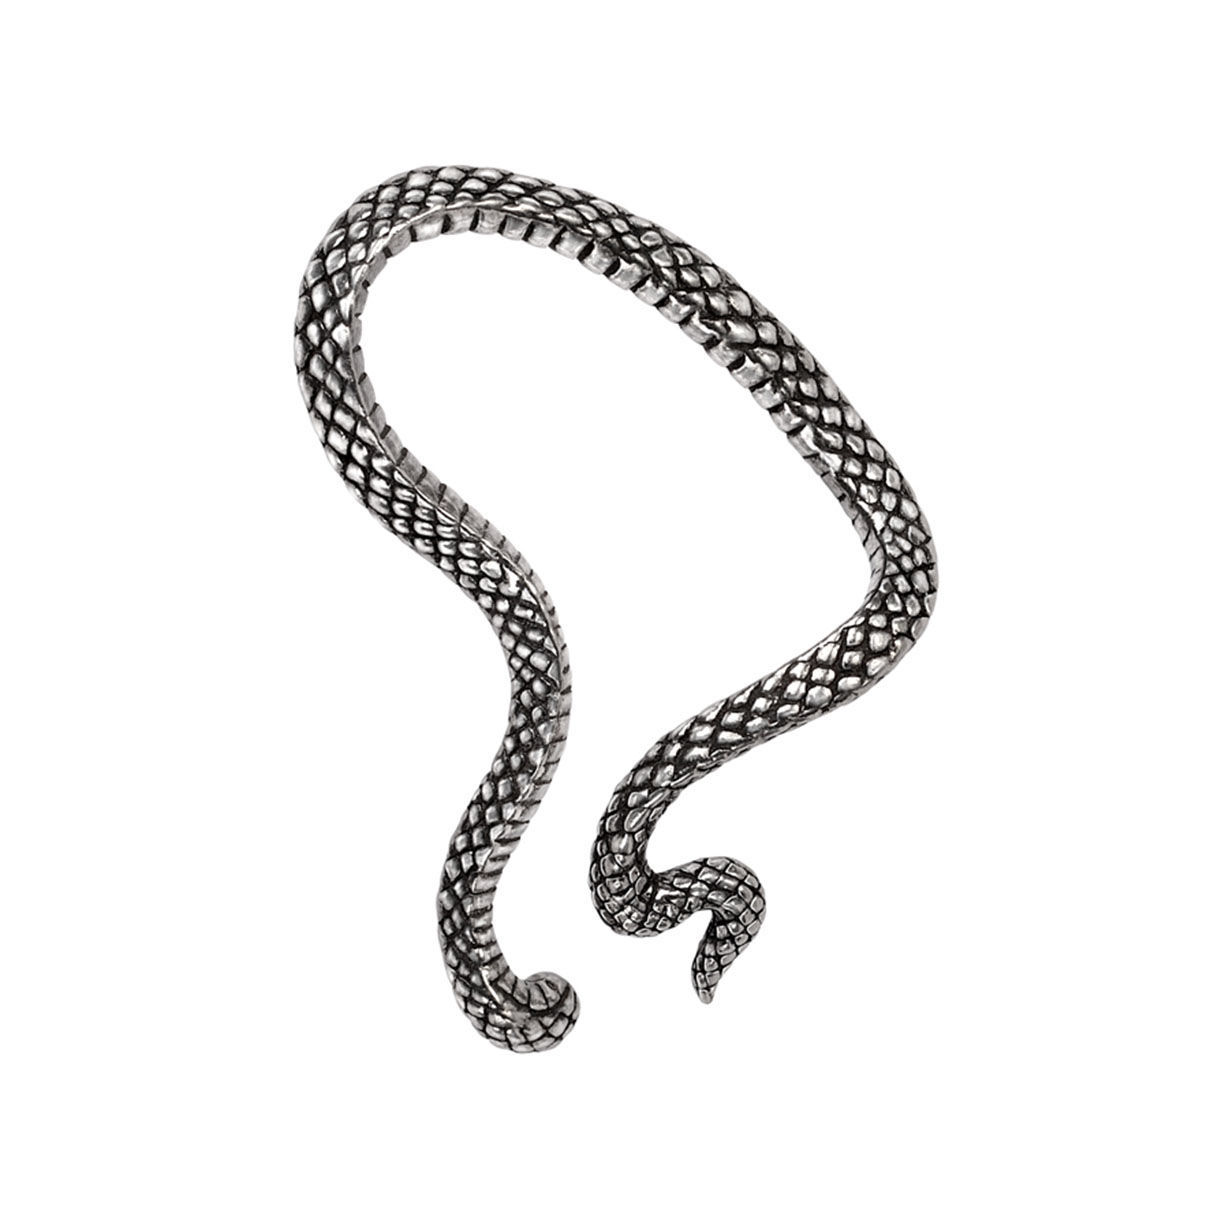 Pewter Serpentine Ear Wrap bends around the left ear and secures with a surgical steel post